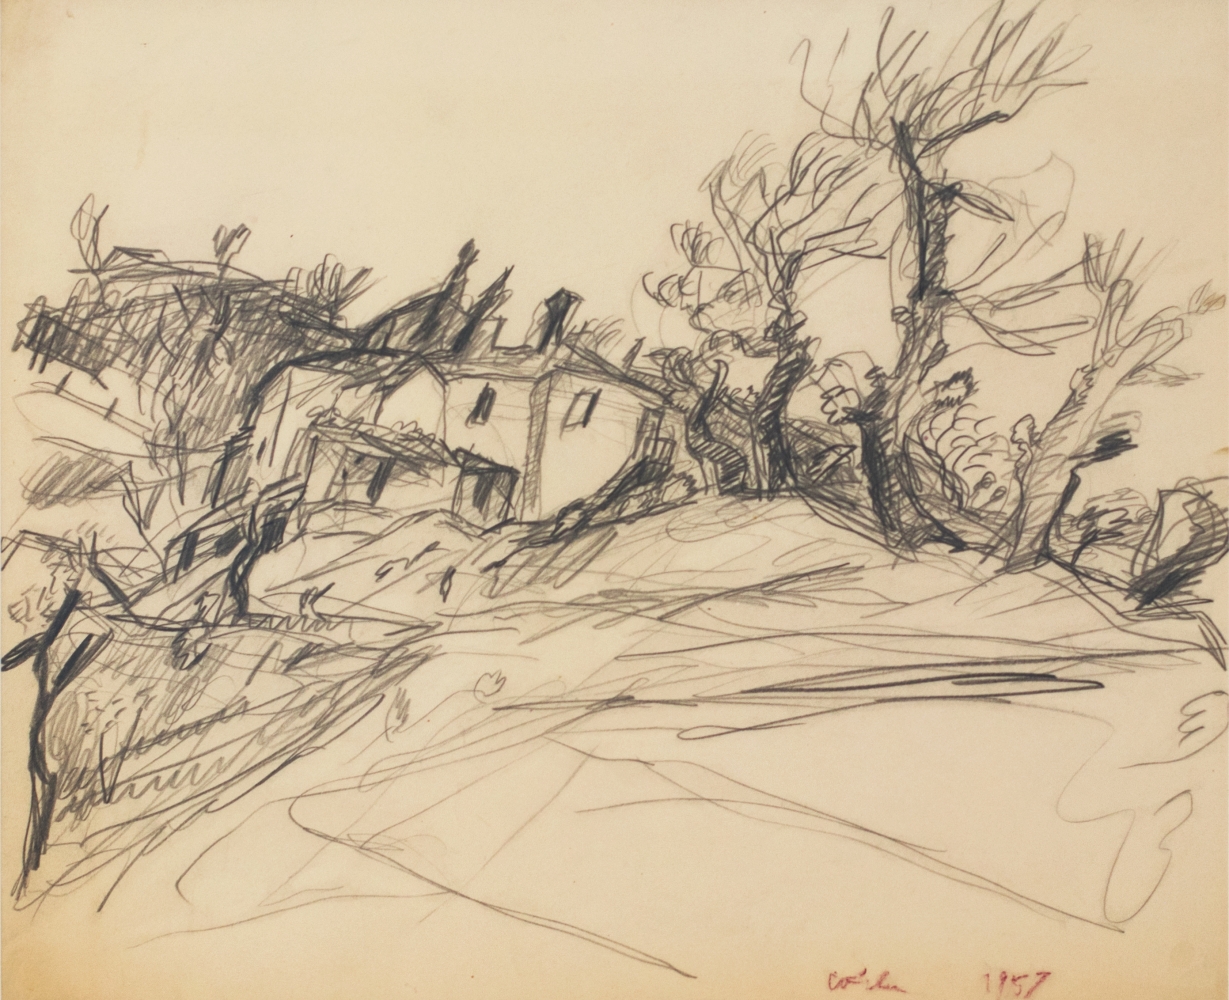 Wolf Kahn, In Tuscany, 1957, Pencil on paper, 14 x 17 inches, Wolf Kahn art for sale, Wolf Kahn Drawings